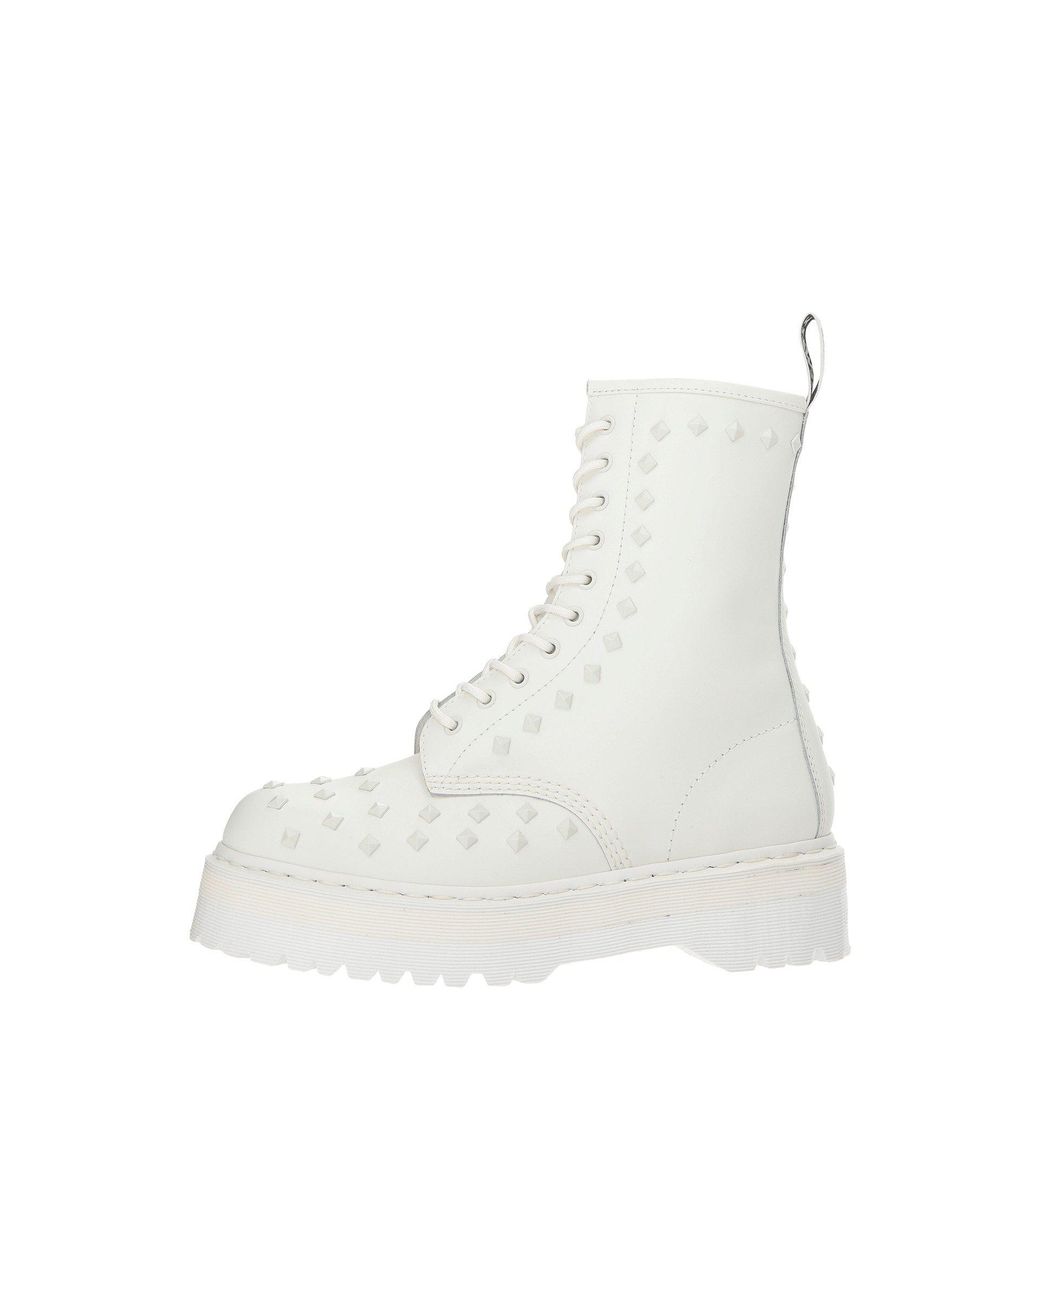 Dr. Martens 1490 Stud in White | Lyst